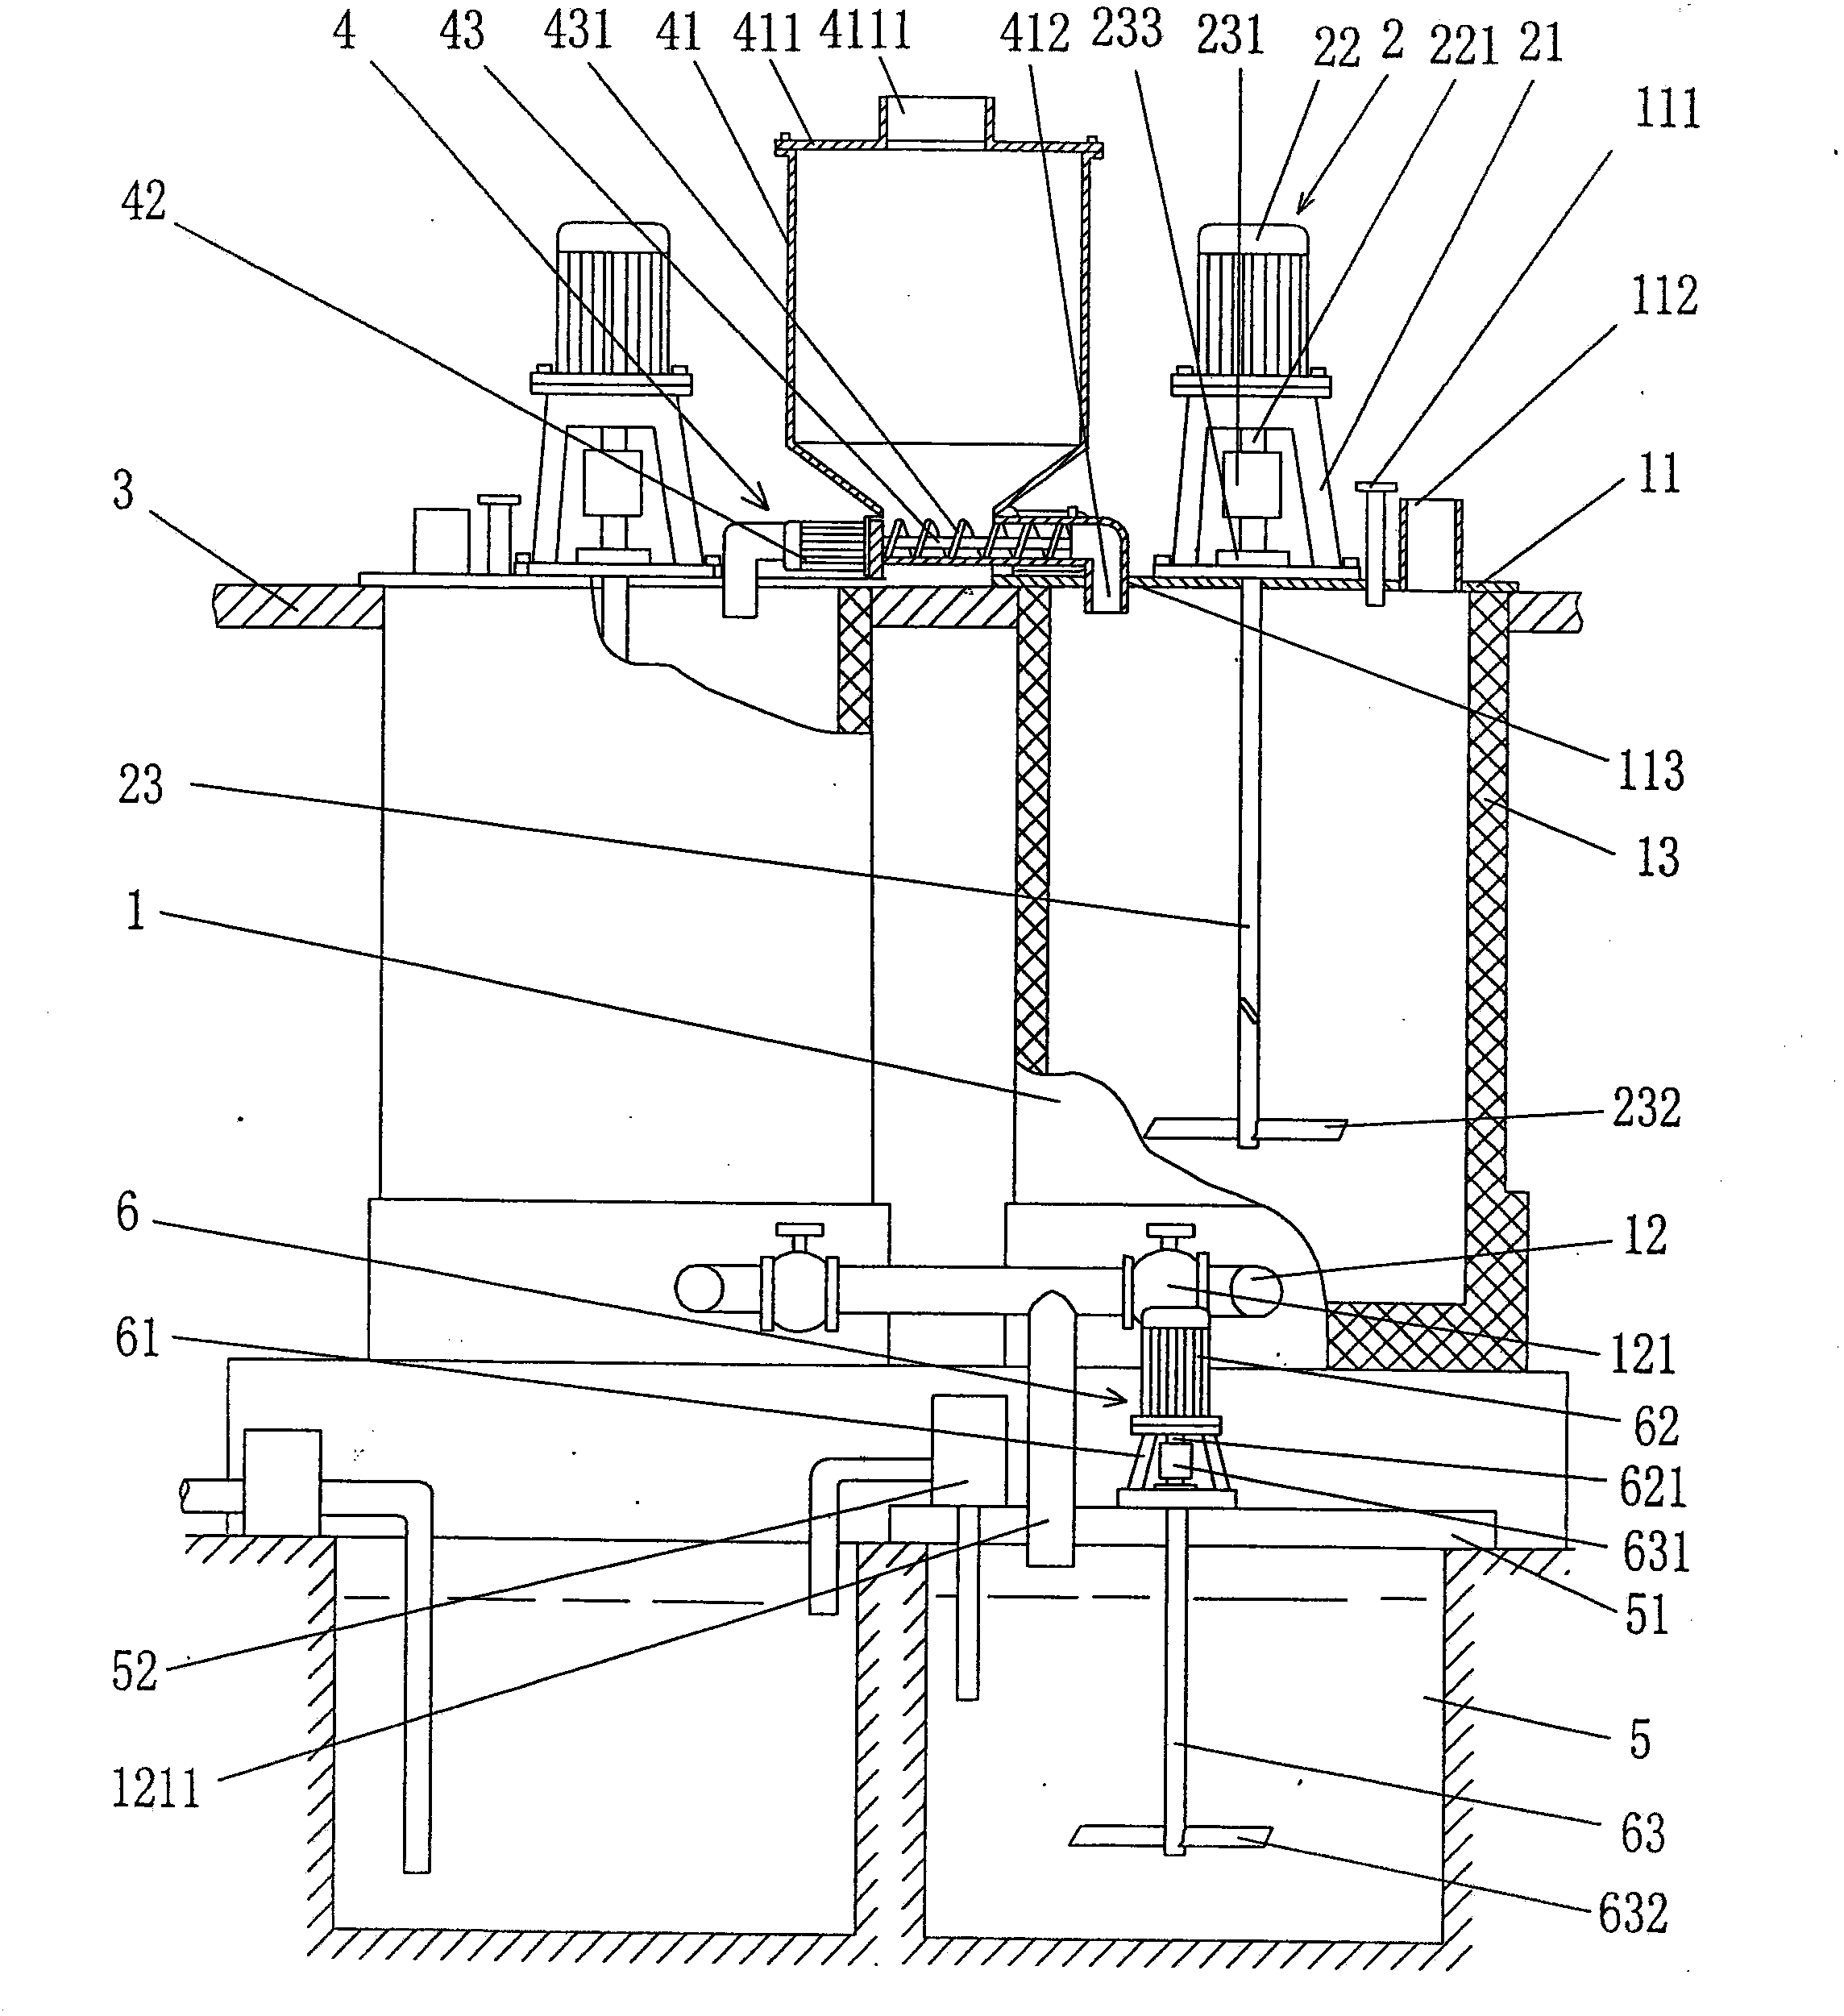 Method for preparing polyaluminum ferric chloride by using iron-containing acid pickle and aluminum ash